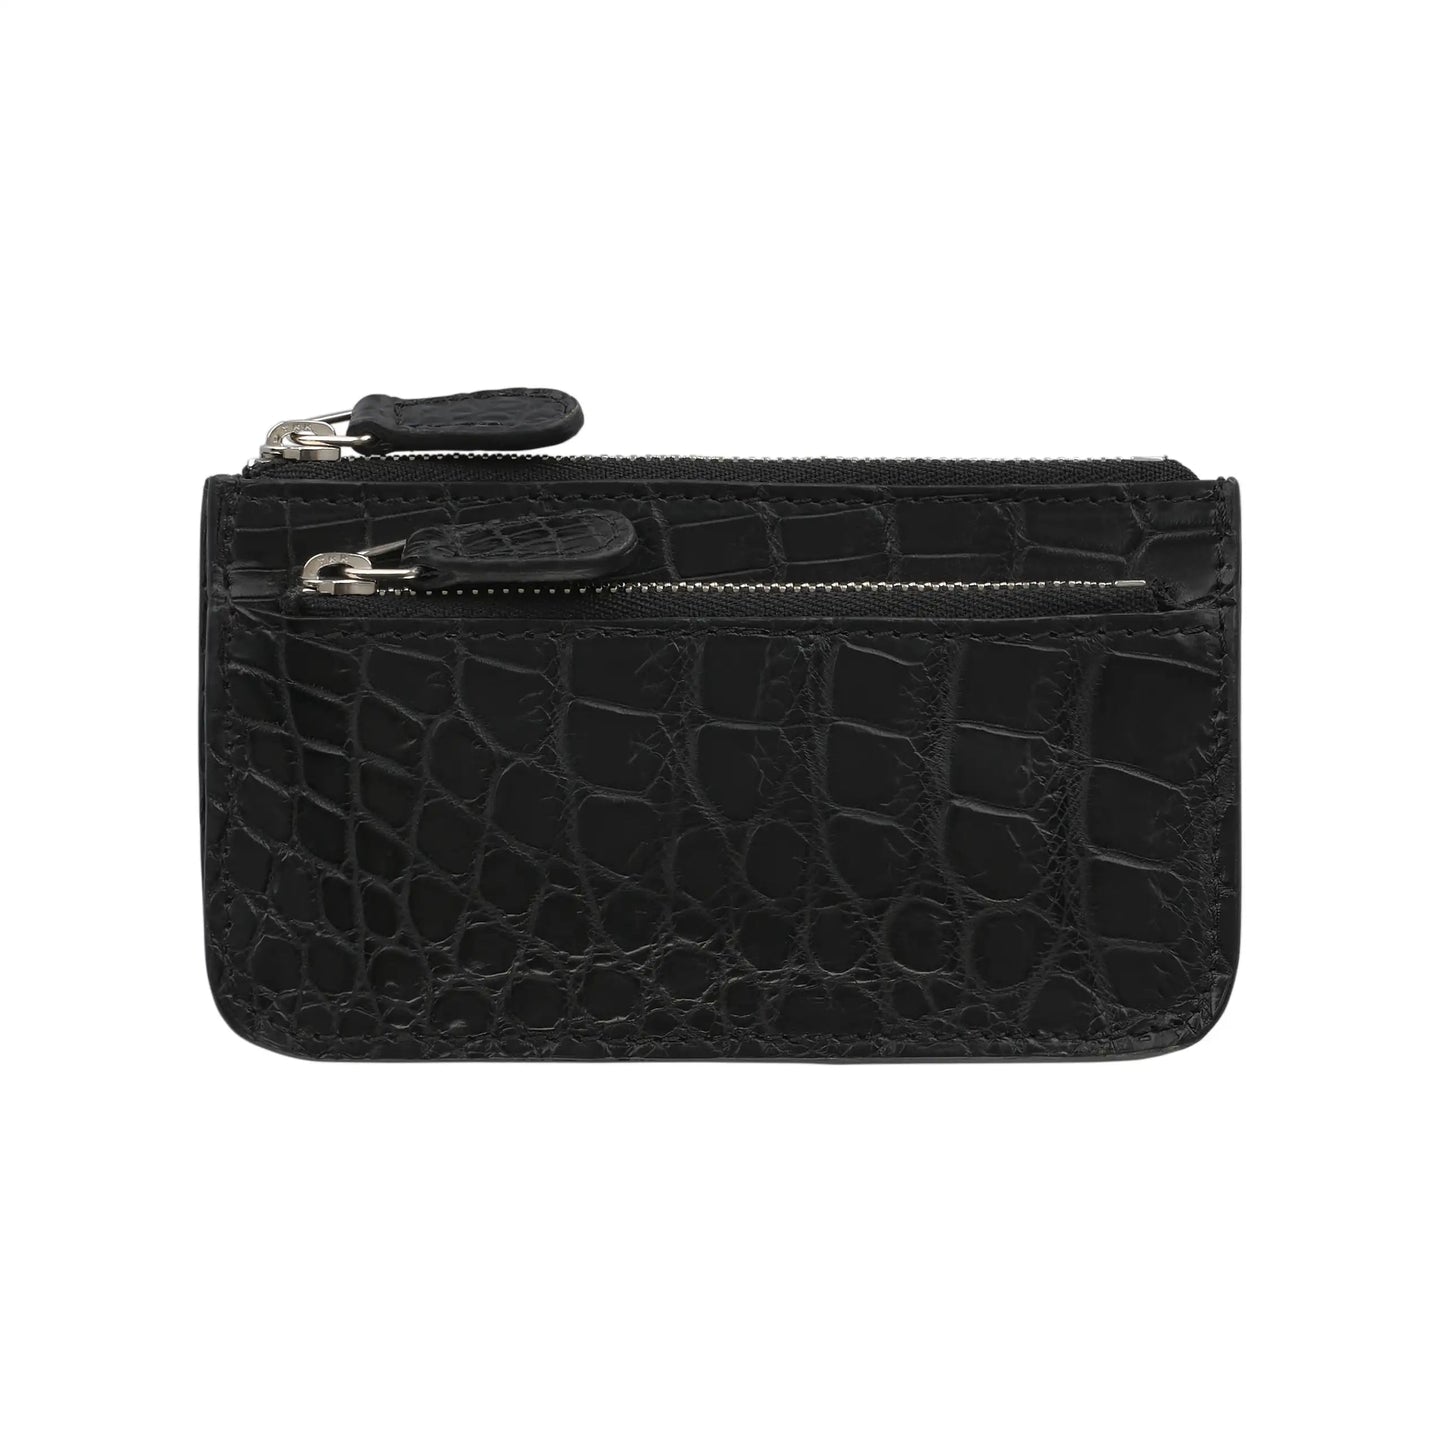 Albini Leather Wallet in Black with Key Chain - SARTALE